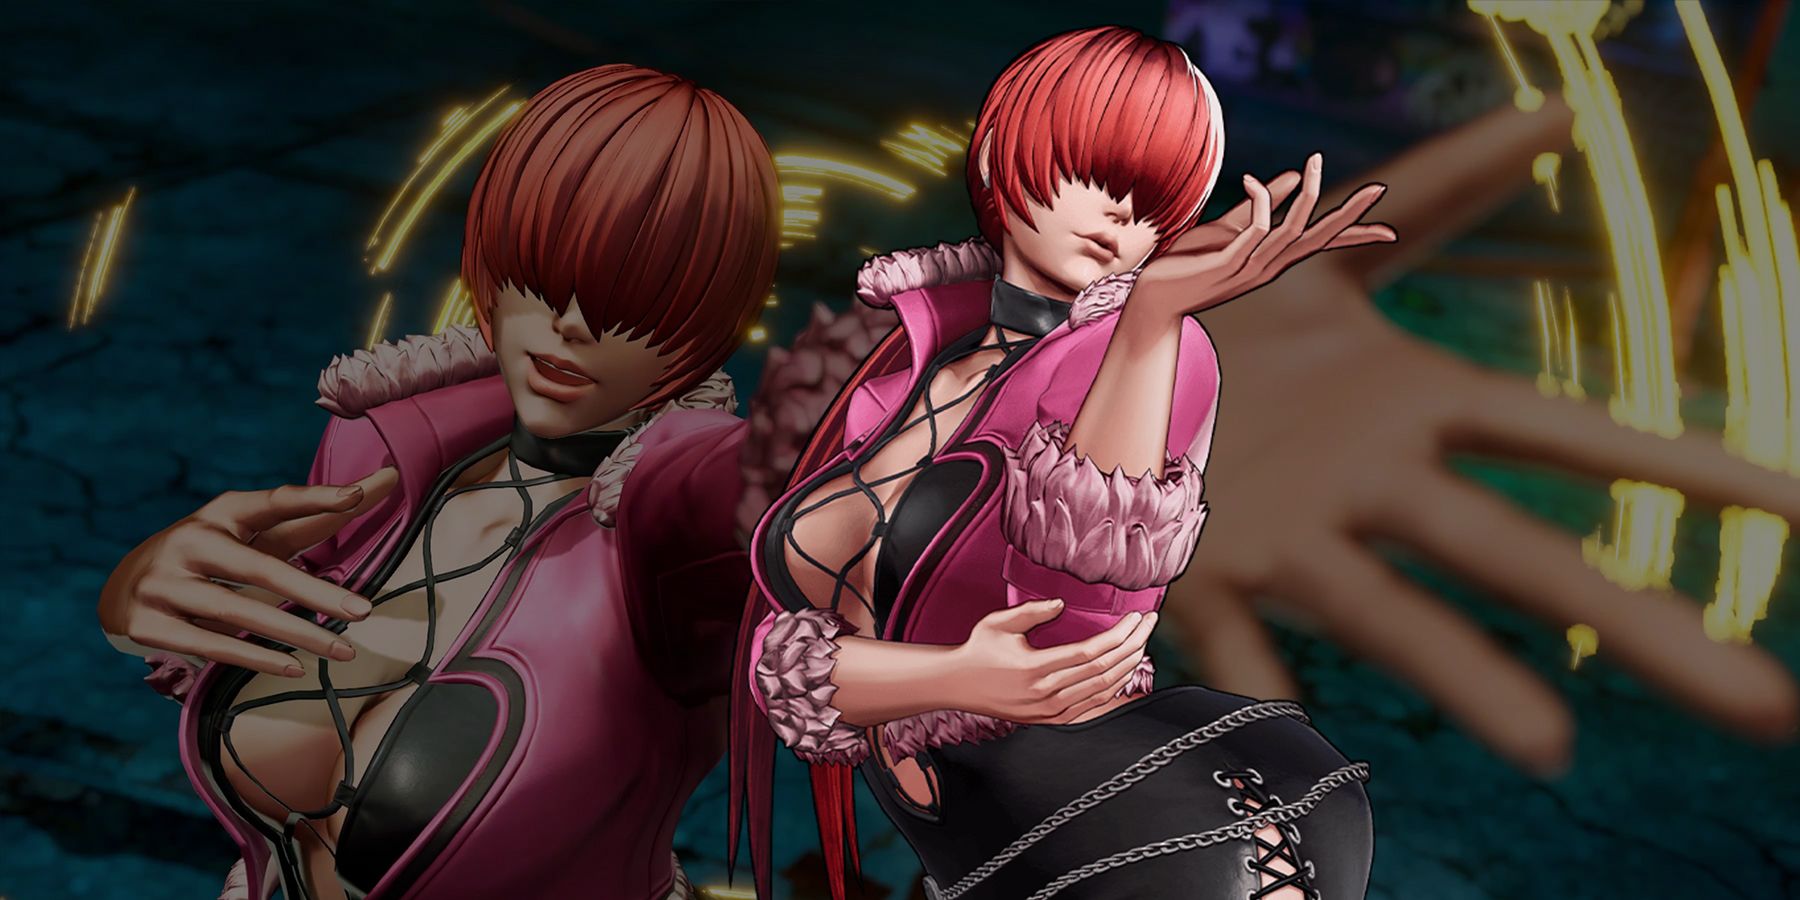 Shermie of King of Fighters